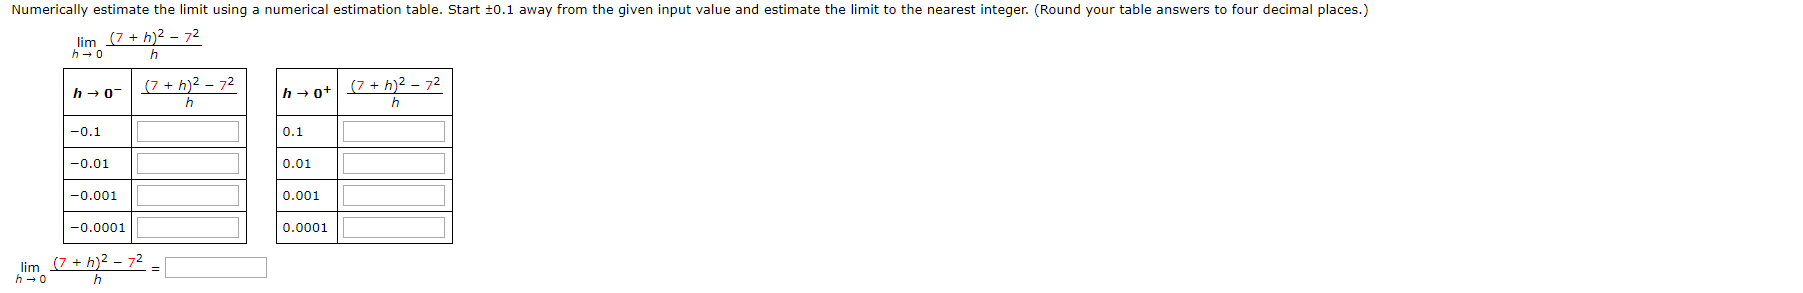 Numerically estimate the limit using a numerical estimation table. Start t0.1 away from the given input value and estimate the limit to the nearest integer. (Round your table answers to four decimal places.)
lim (7h)2-72
h 0
h
(7 h)2-72
(7h)2 - 72
h 0
hot
h
-0.1
0.1
-0.01
0.01
-0.001
0.001
0.0001
-0.0001
lim (7h)2 - 72
h 0
h
